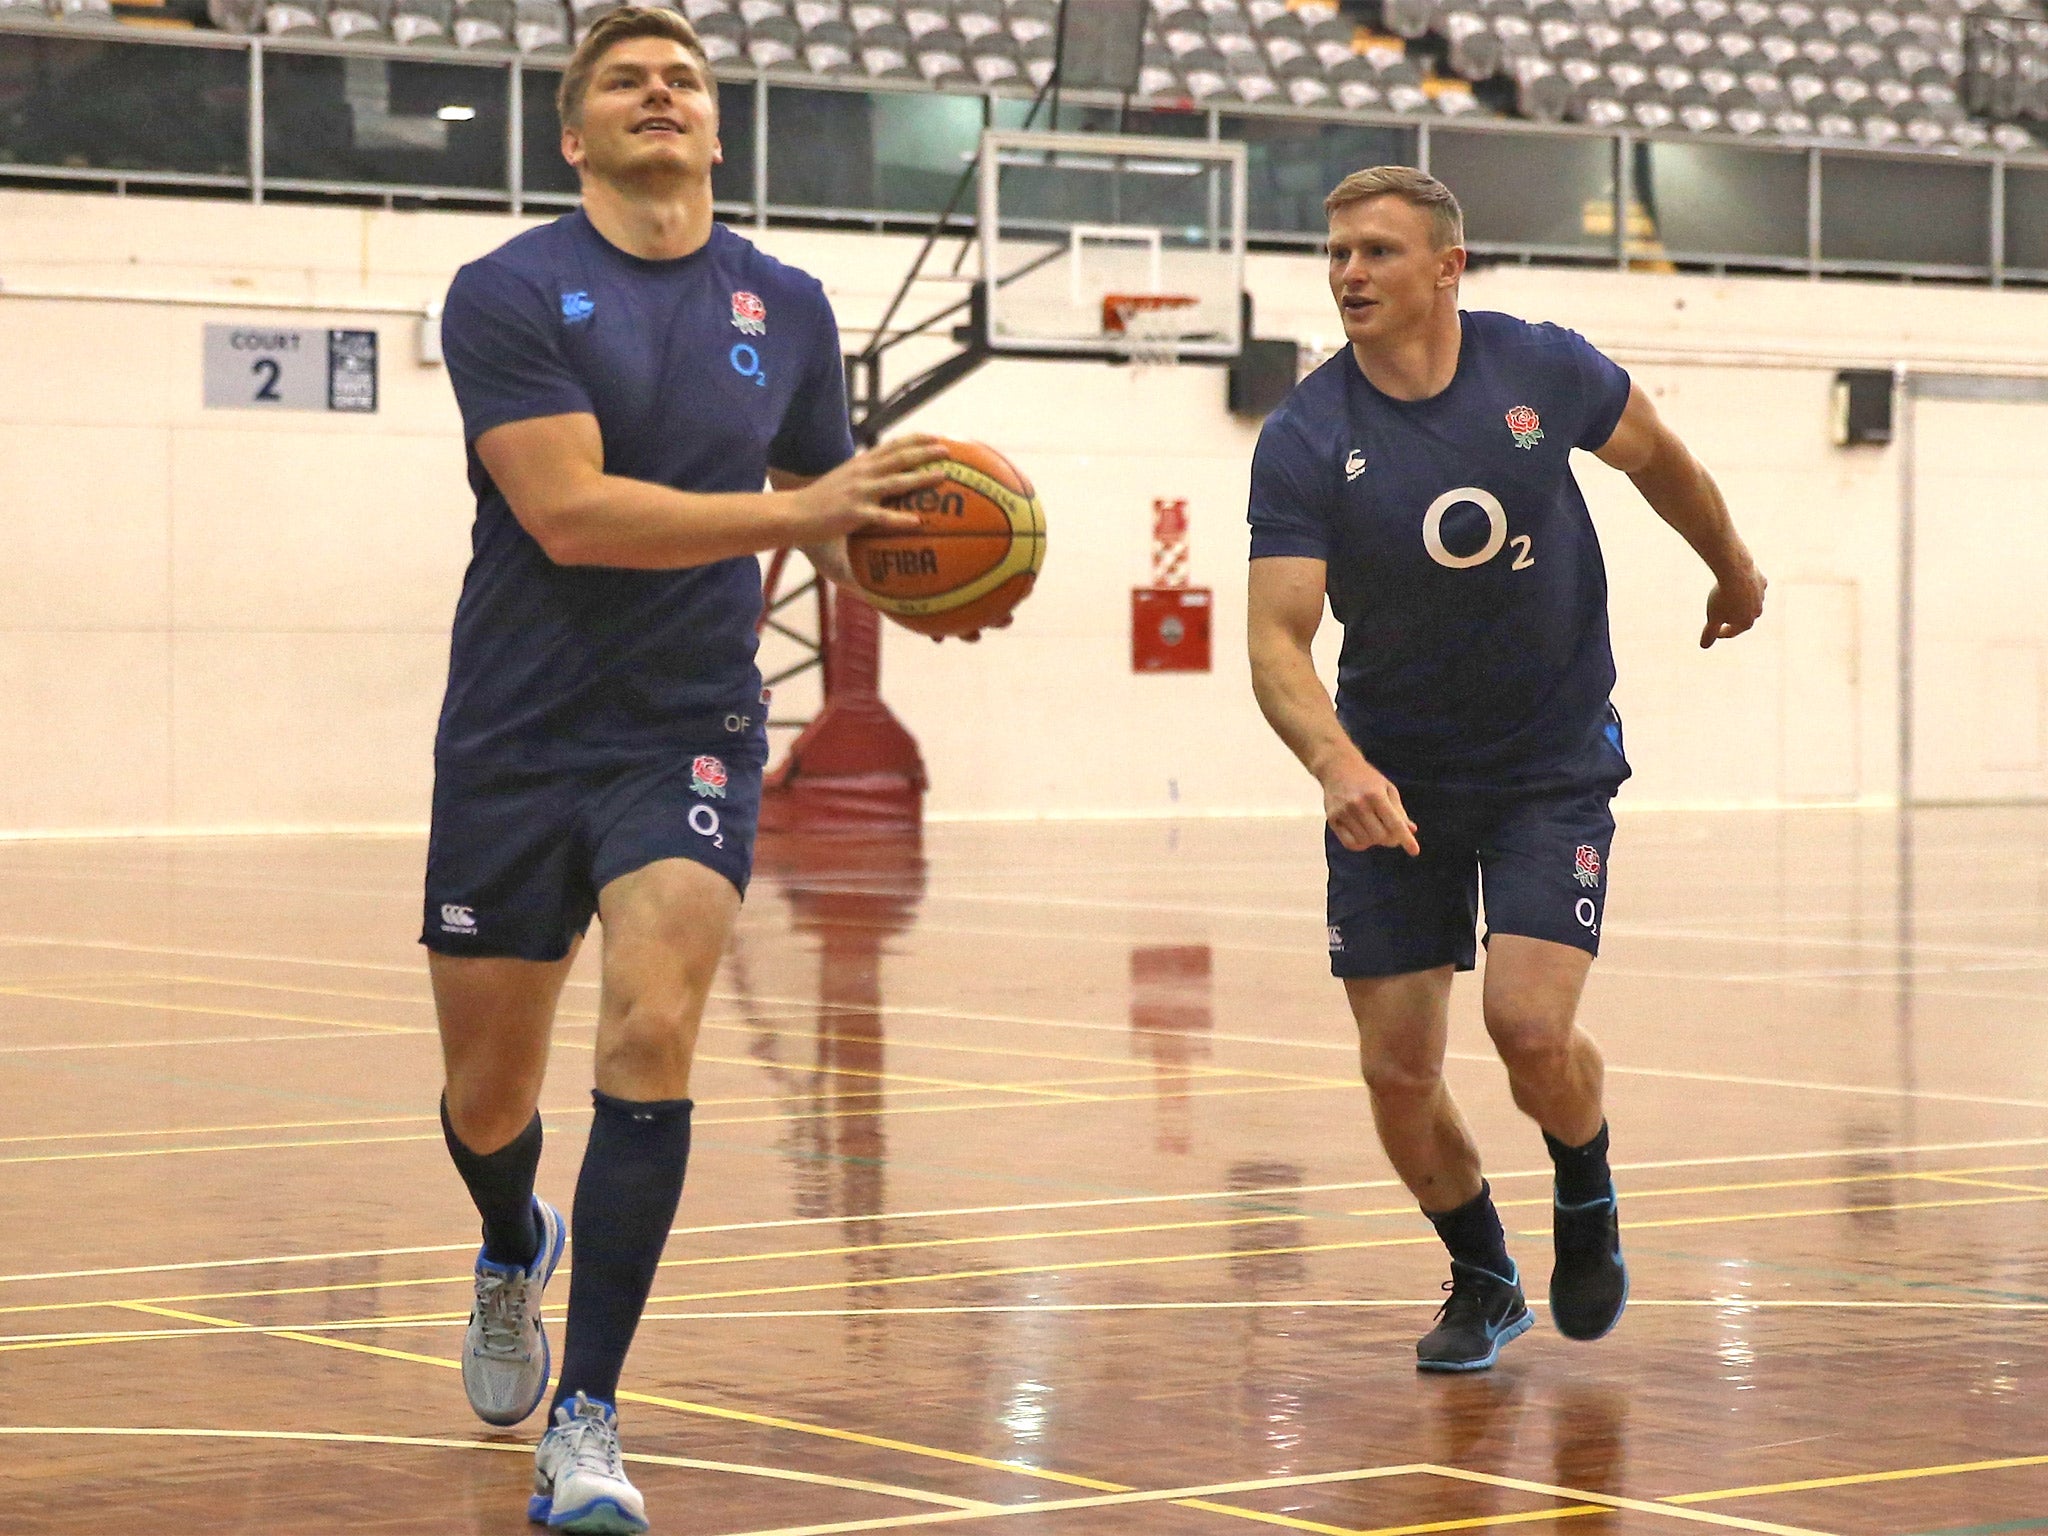 Owen Farrell moves away from Chris Ashton in a basketball warm-up game during an England training session